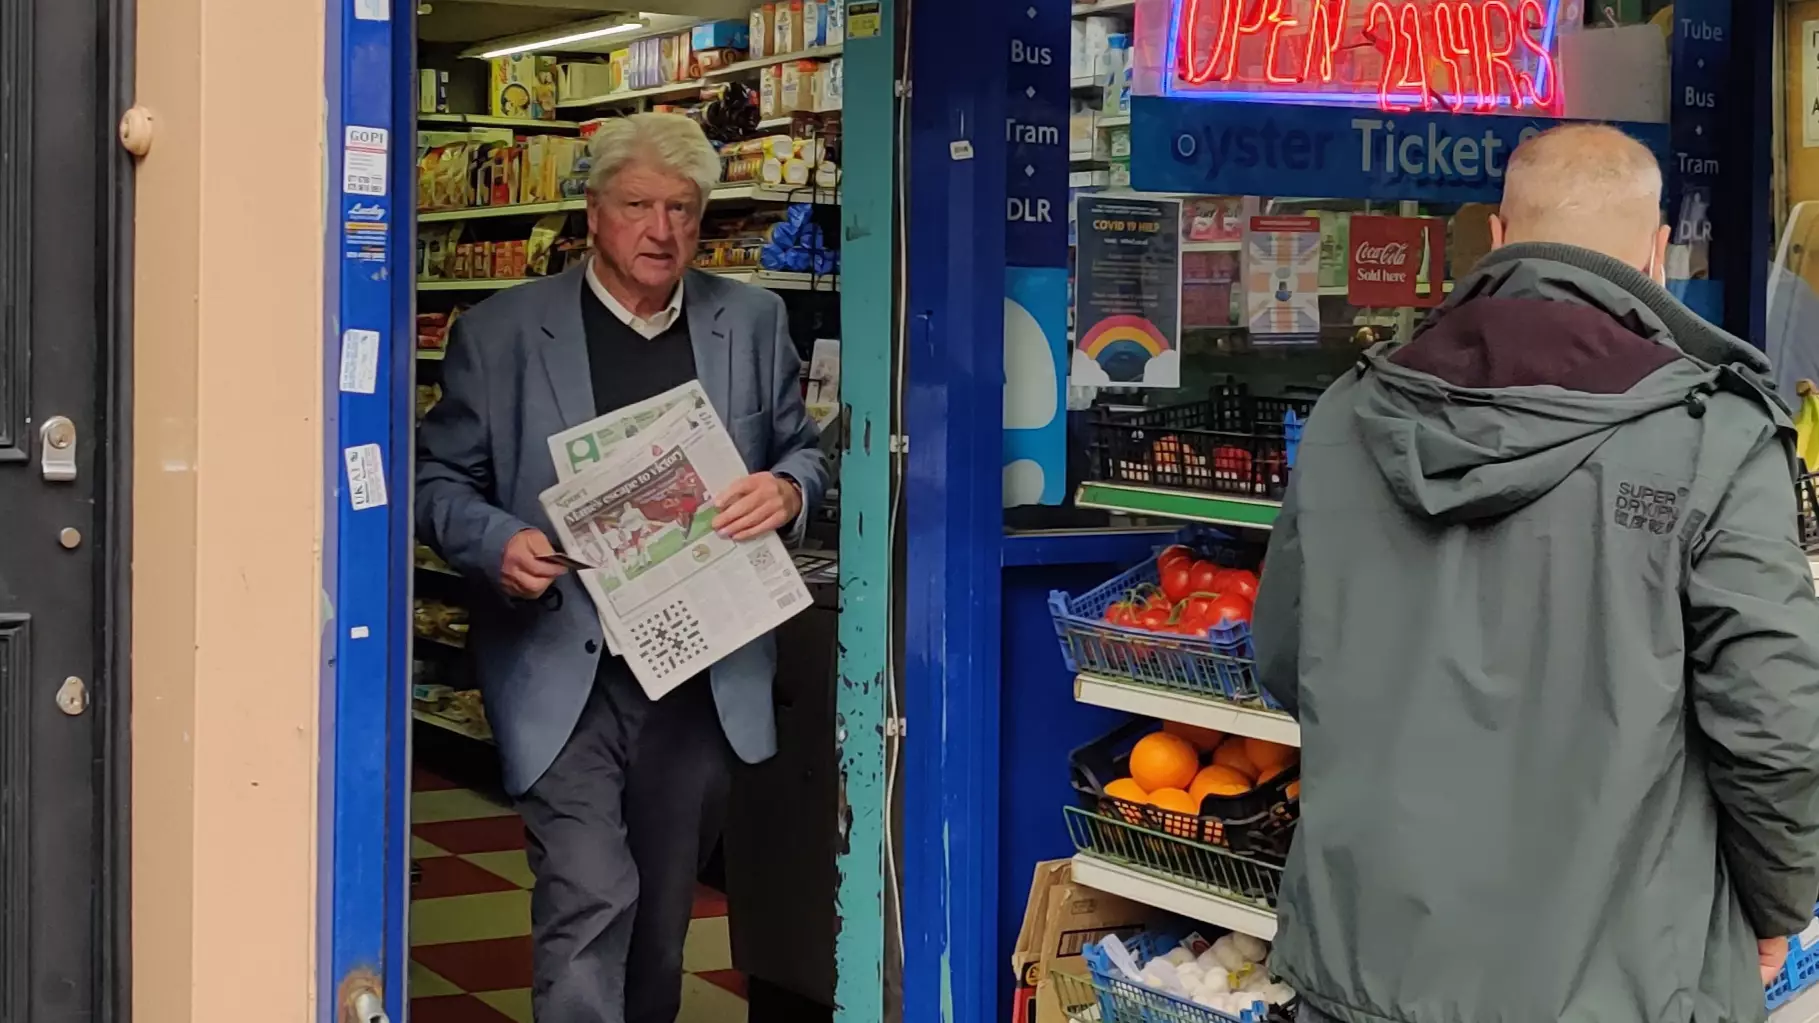 Stanley Johnson Seen In Shop Without A Face Mask